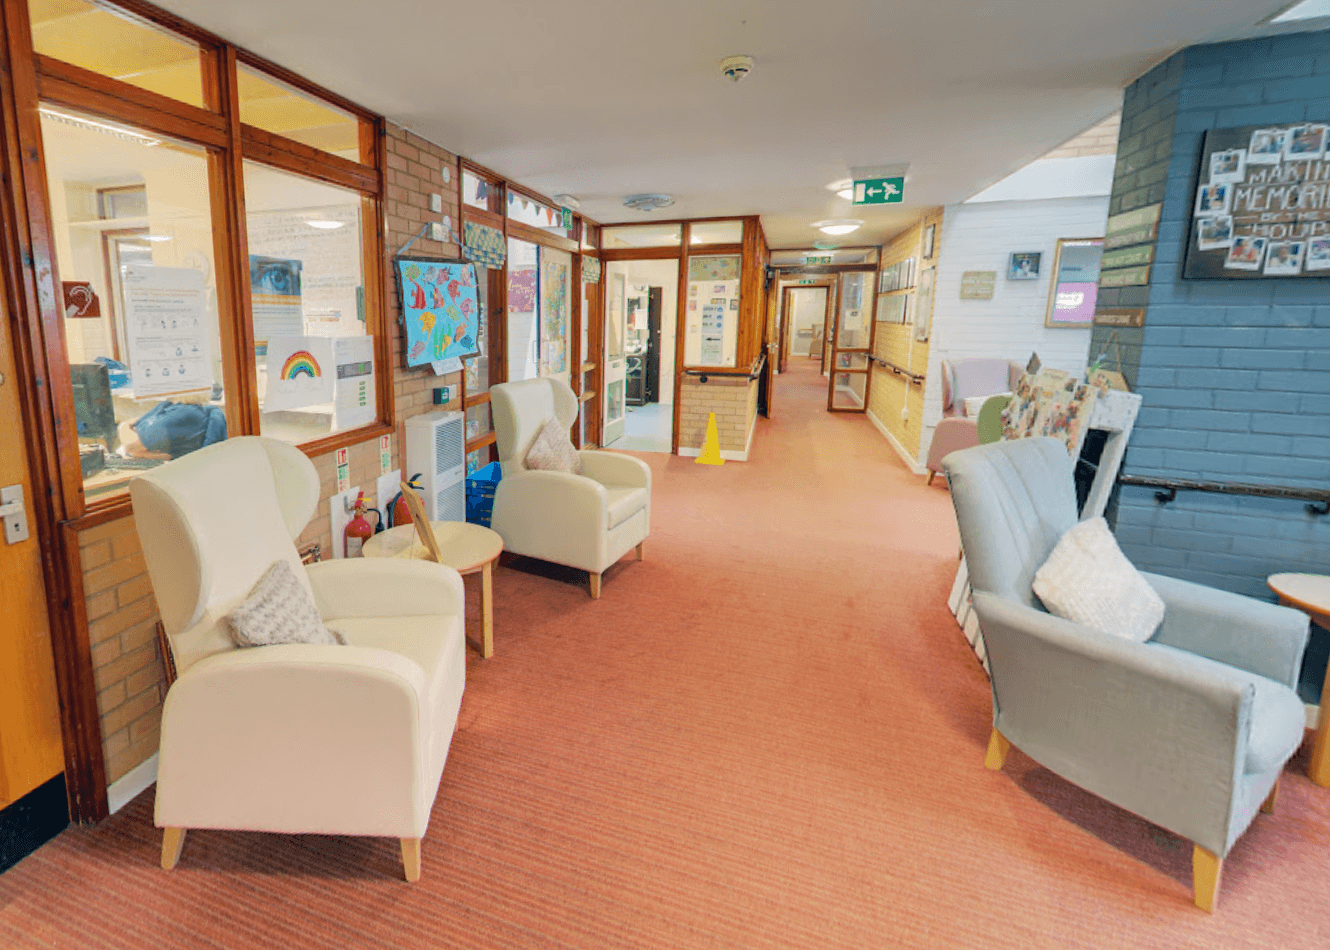 Shaw Healthcare - Victoria House care home 001